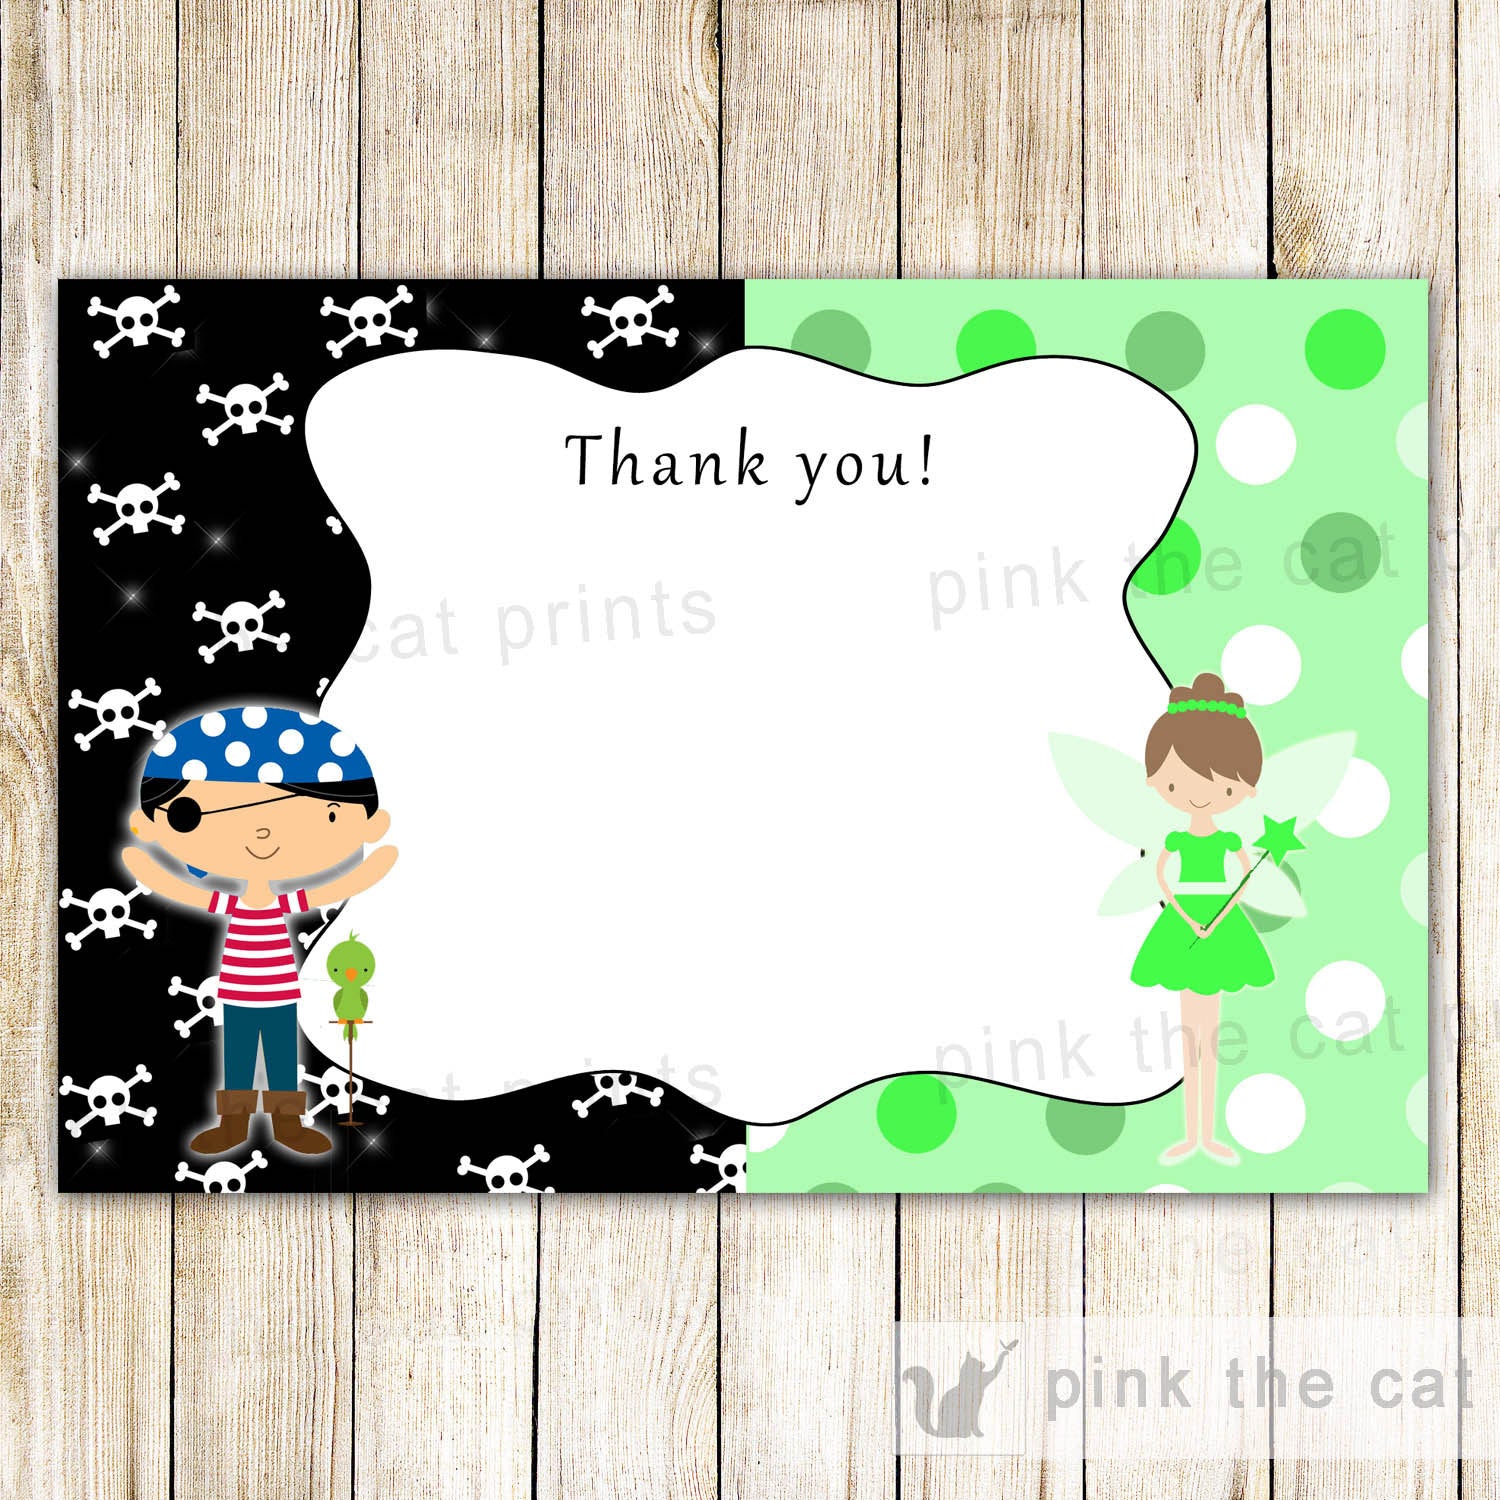 Pirate Fairy Thank You Card - Pixie Kids Birthday Party Notes Lime Gre –  Pink the Cat